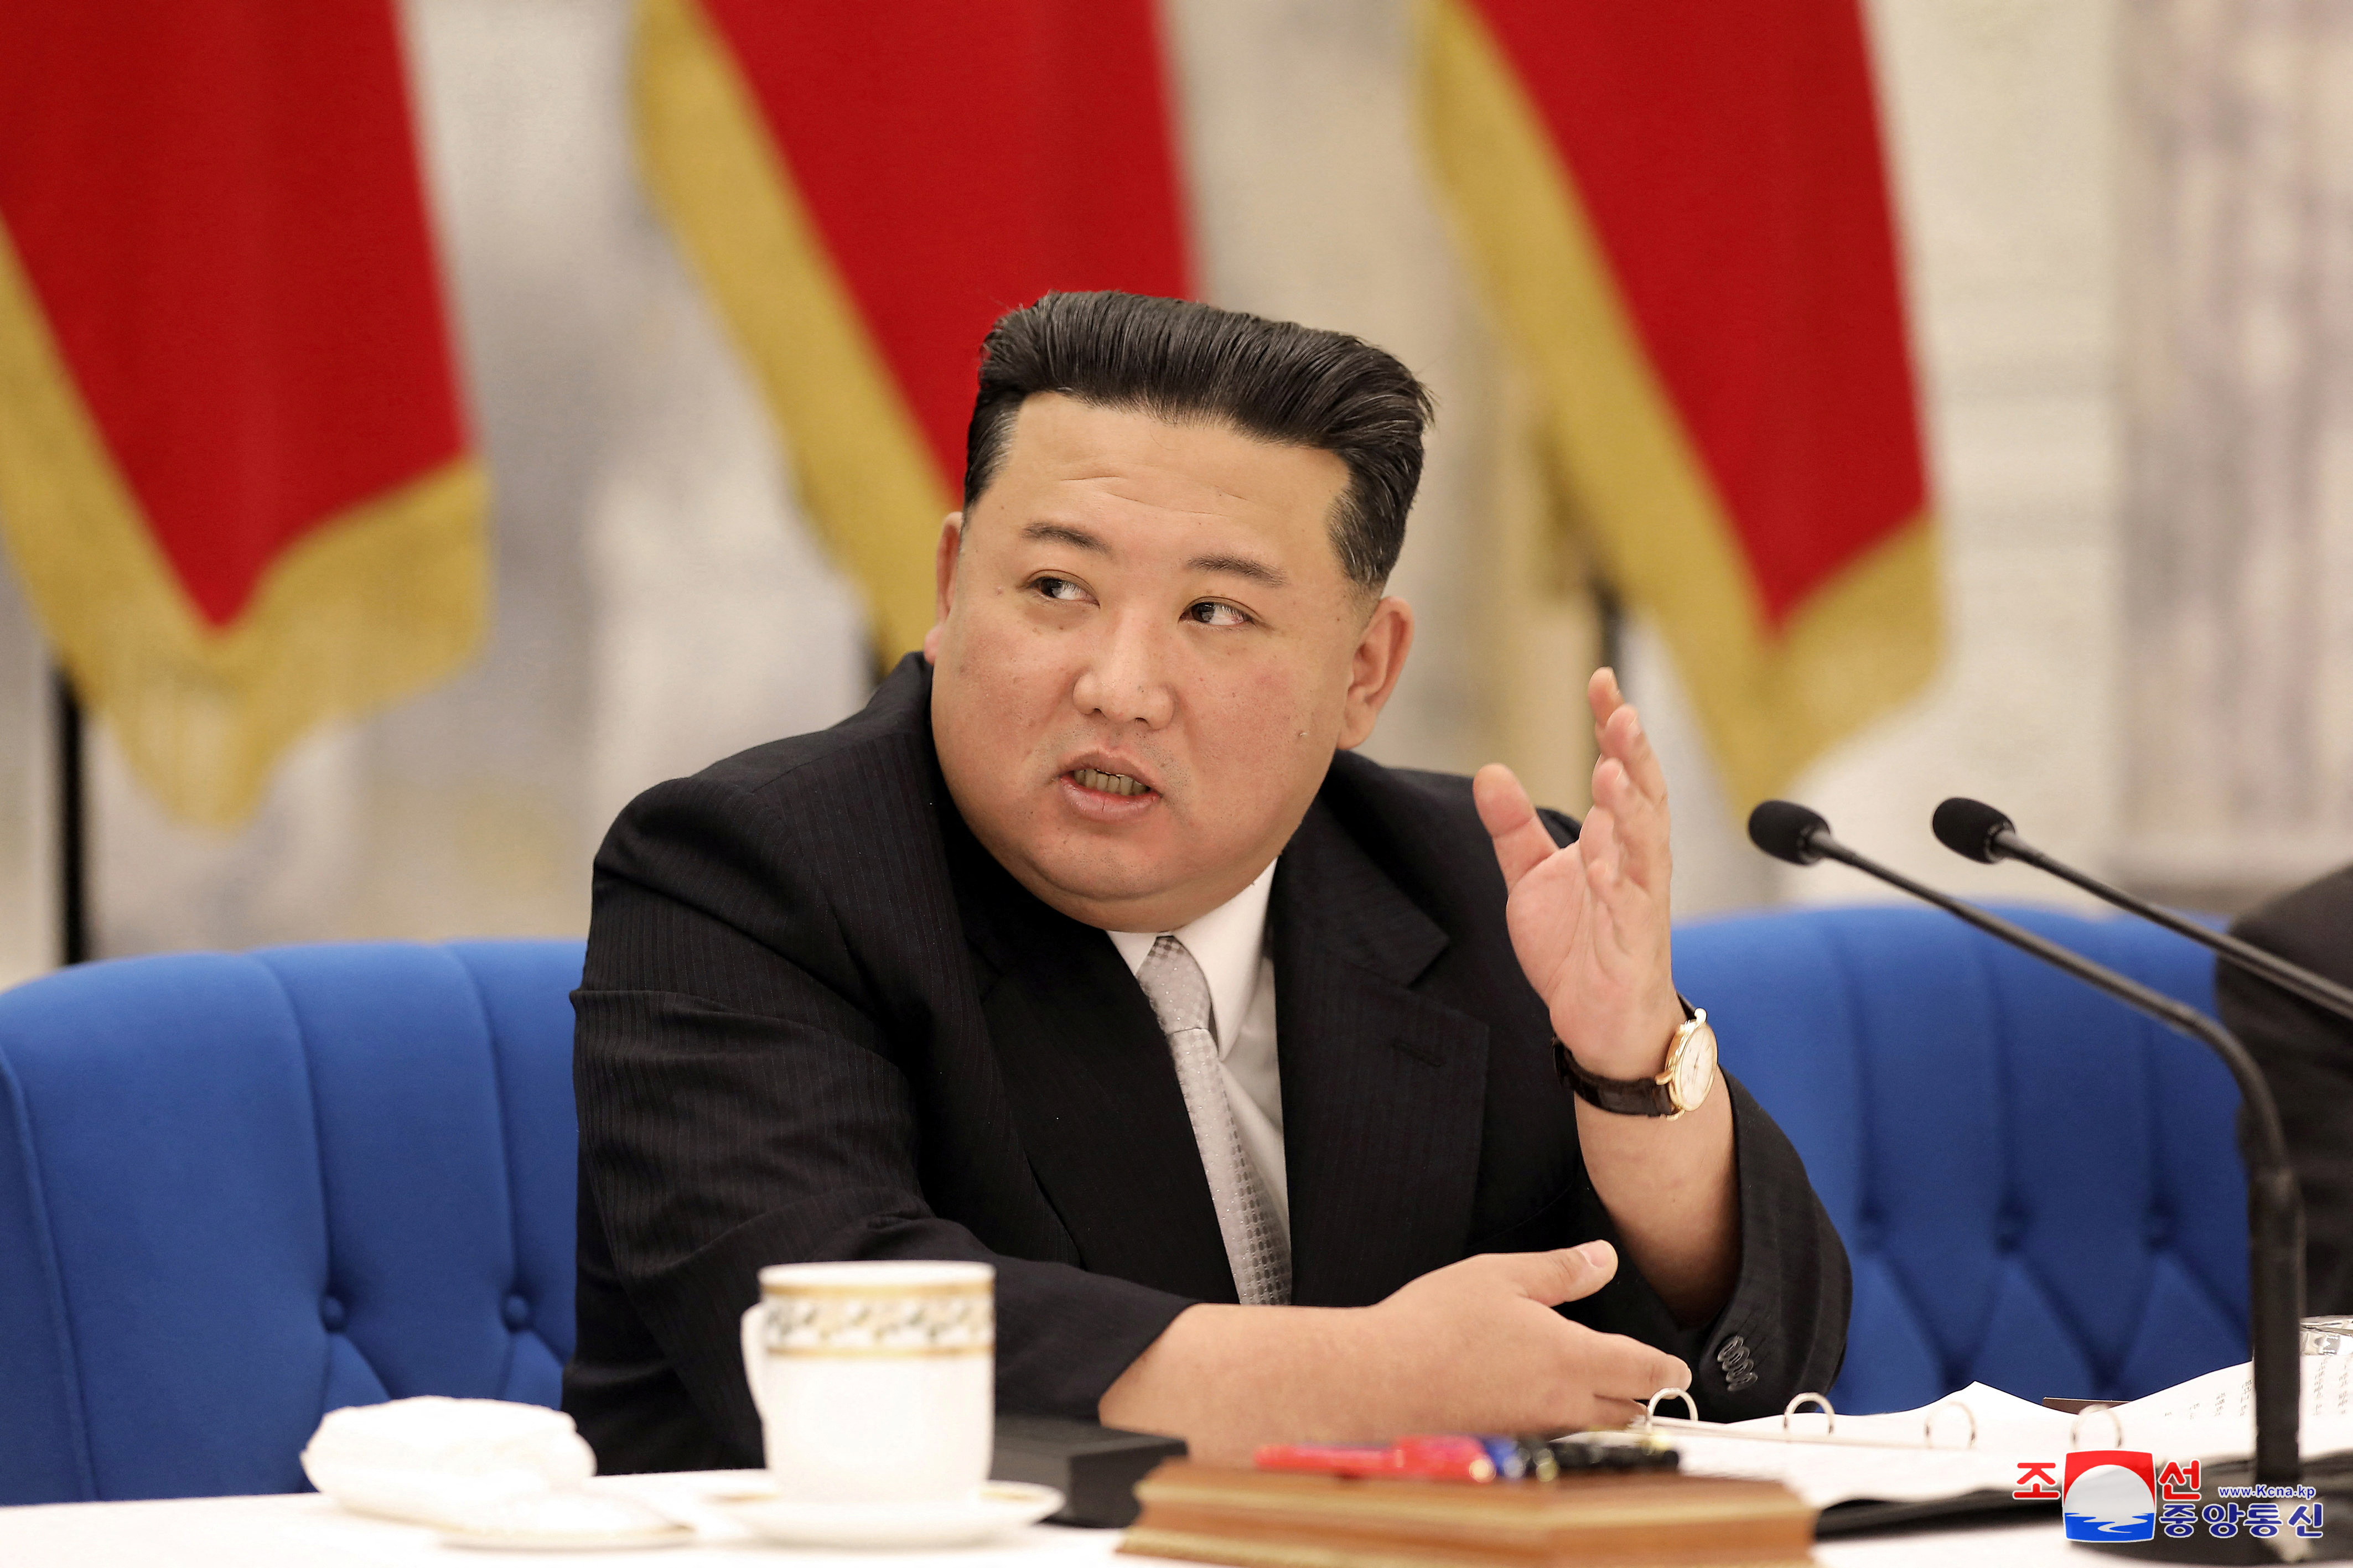 North Korean leader Kim Jong Un holds theThird Enlarged Meeting of Eighth Central Military Commission of the Workers' Party of Korea (WPK) in Pyongyang